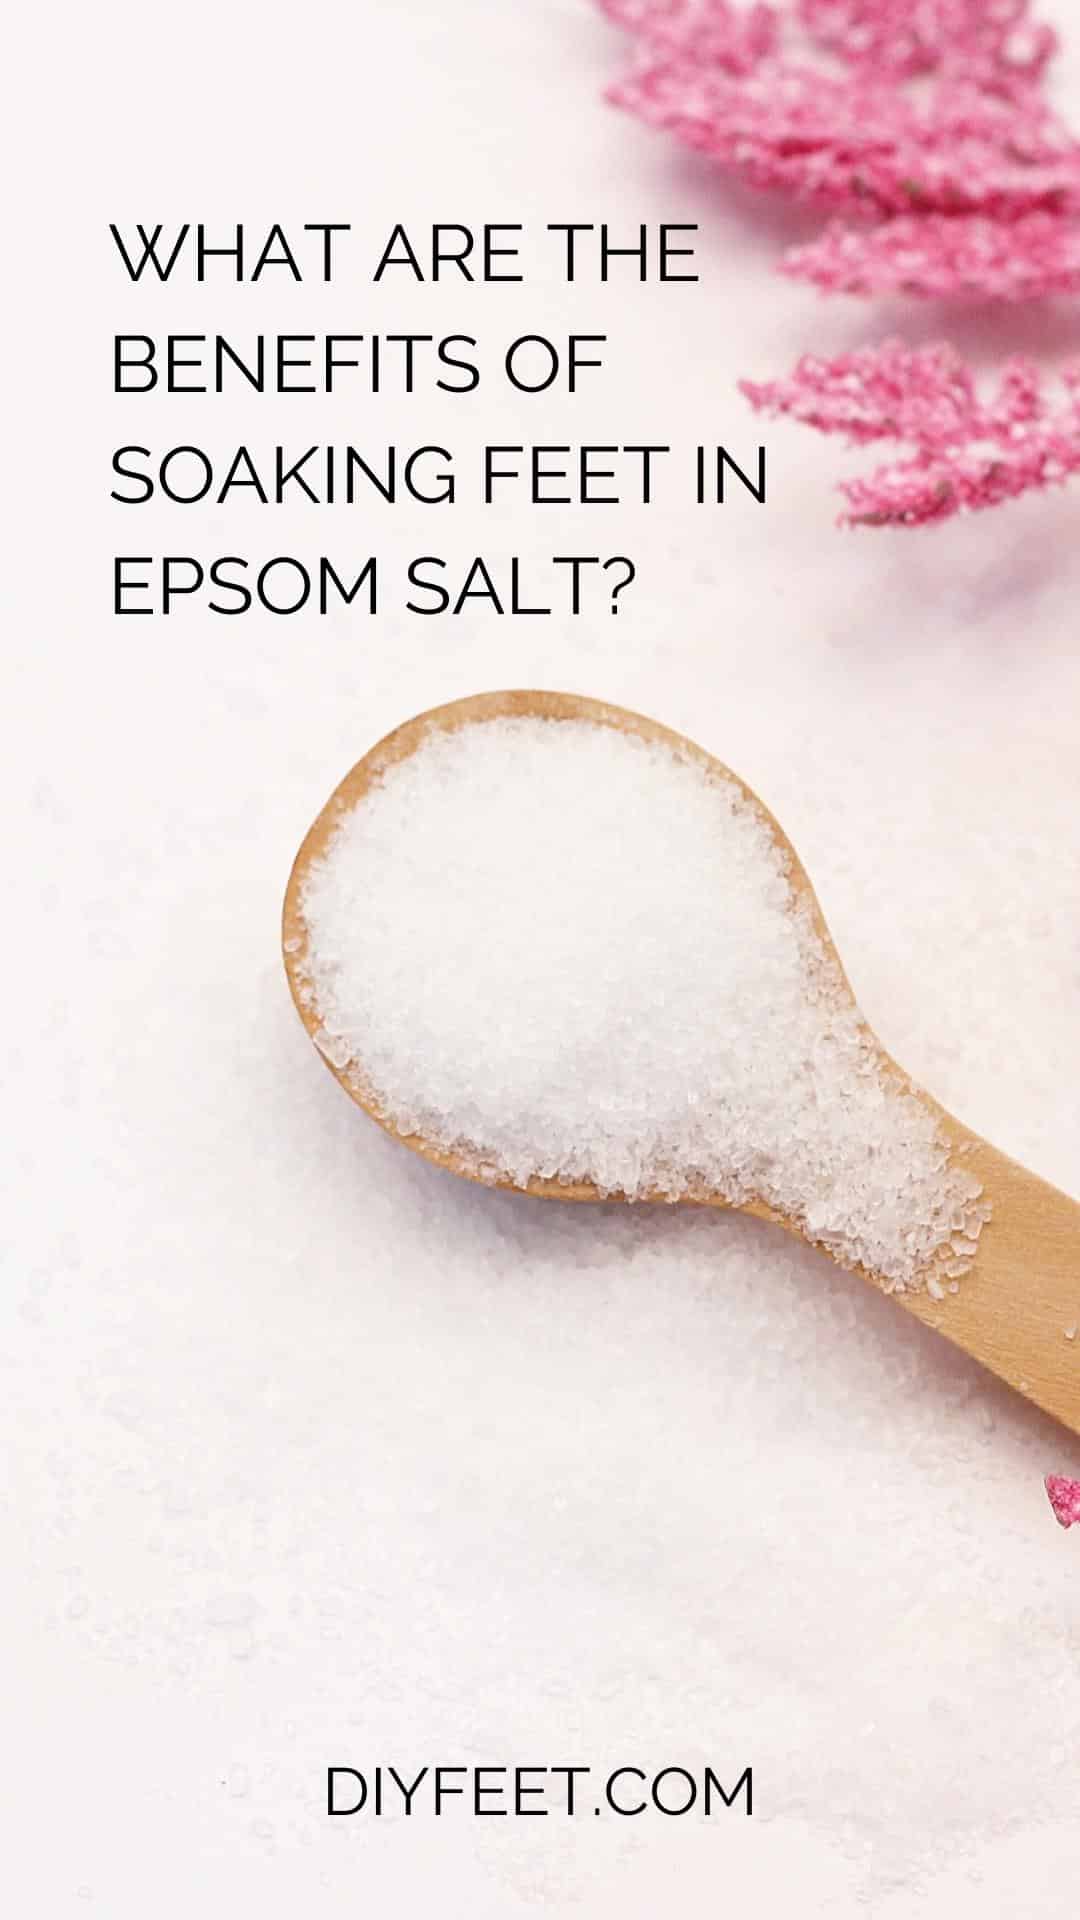 What are the Benefits of Soaking Feet in Epsom Salt